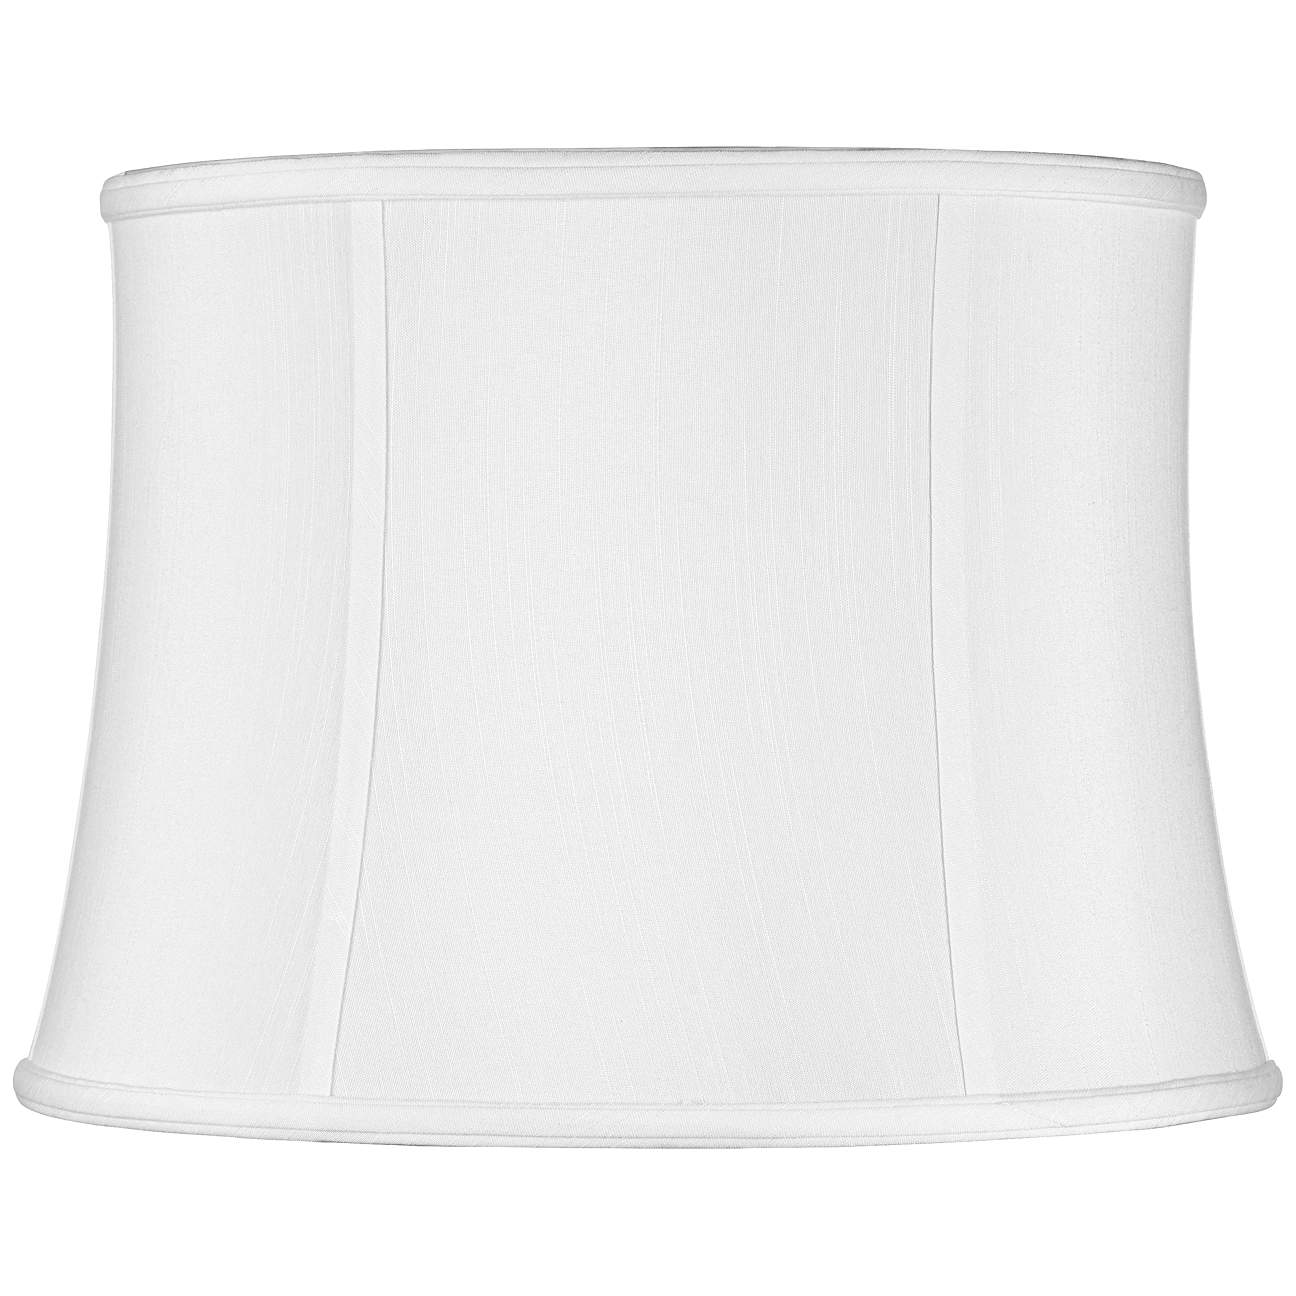 Imperial Collection White Drum Lamp Shade 14x16x12 (Spider) - #8R345 ...